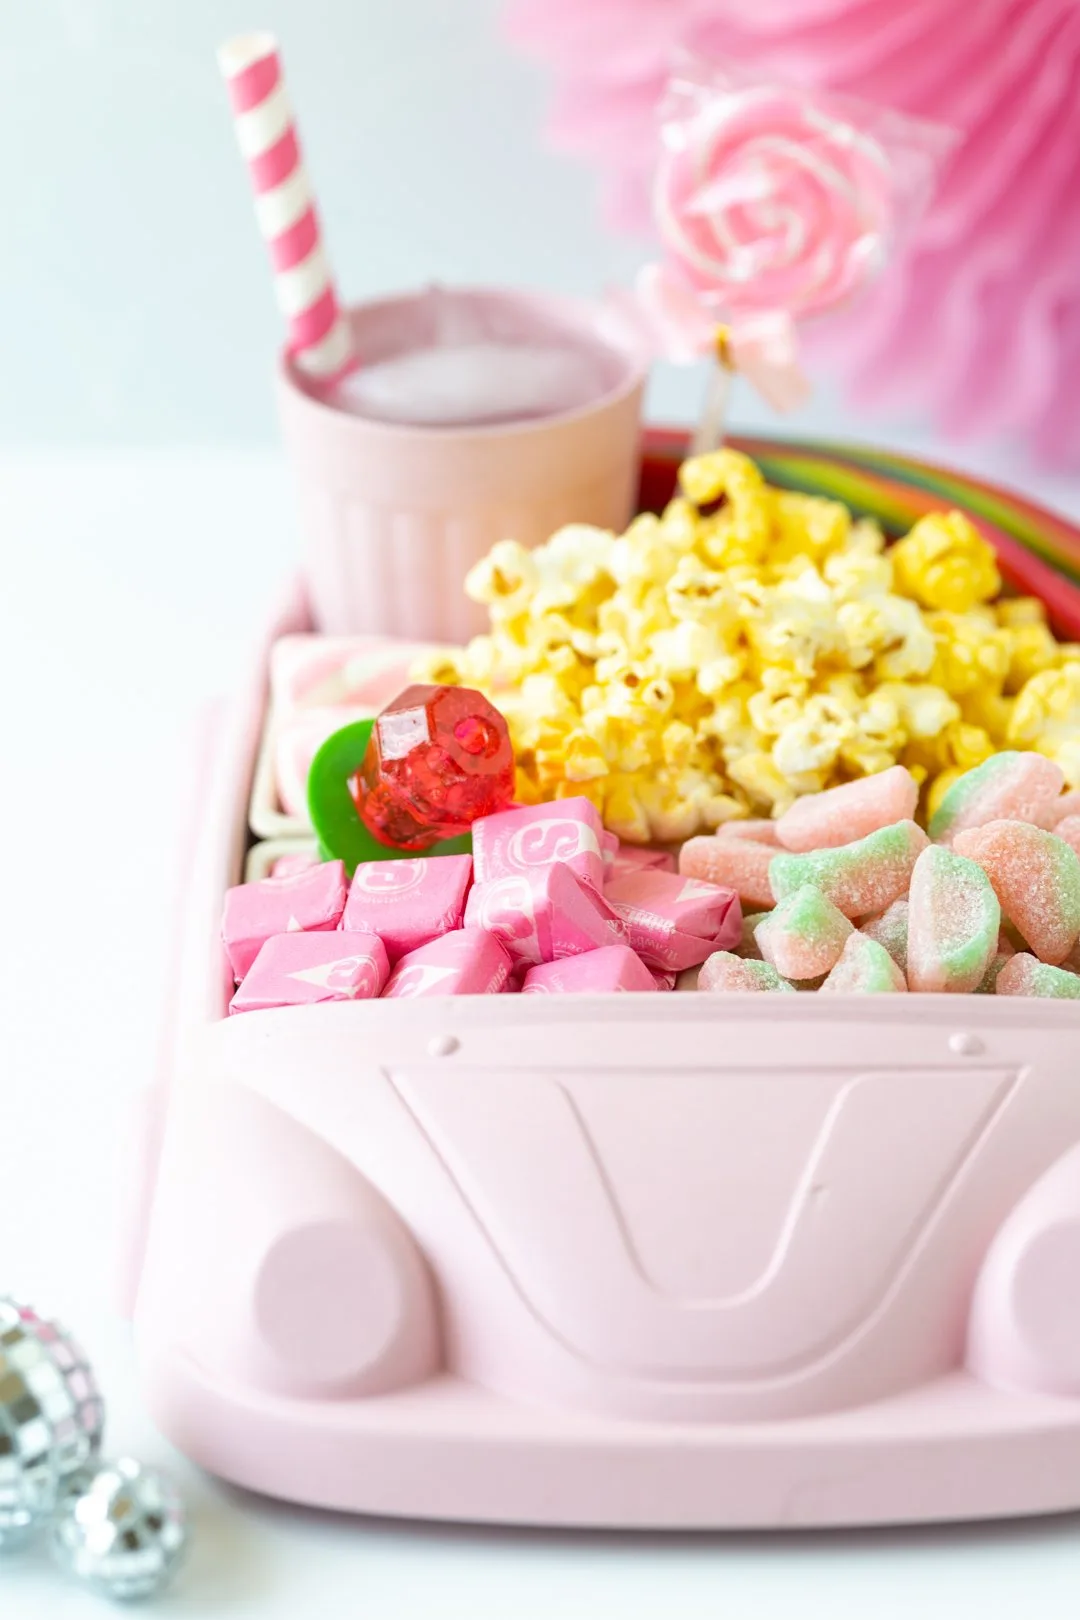 adorable pink car tray used as a movie night in snack tray filled with popcorn and pink candies.